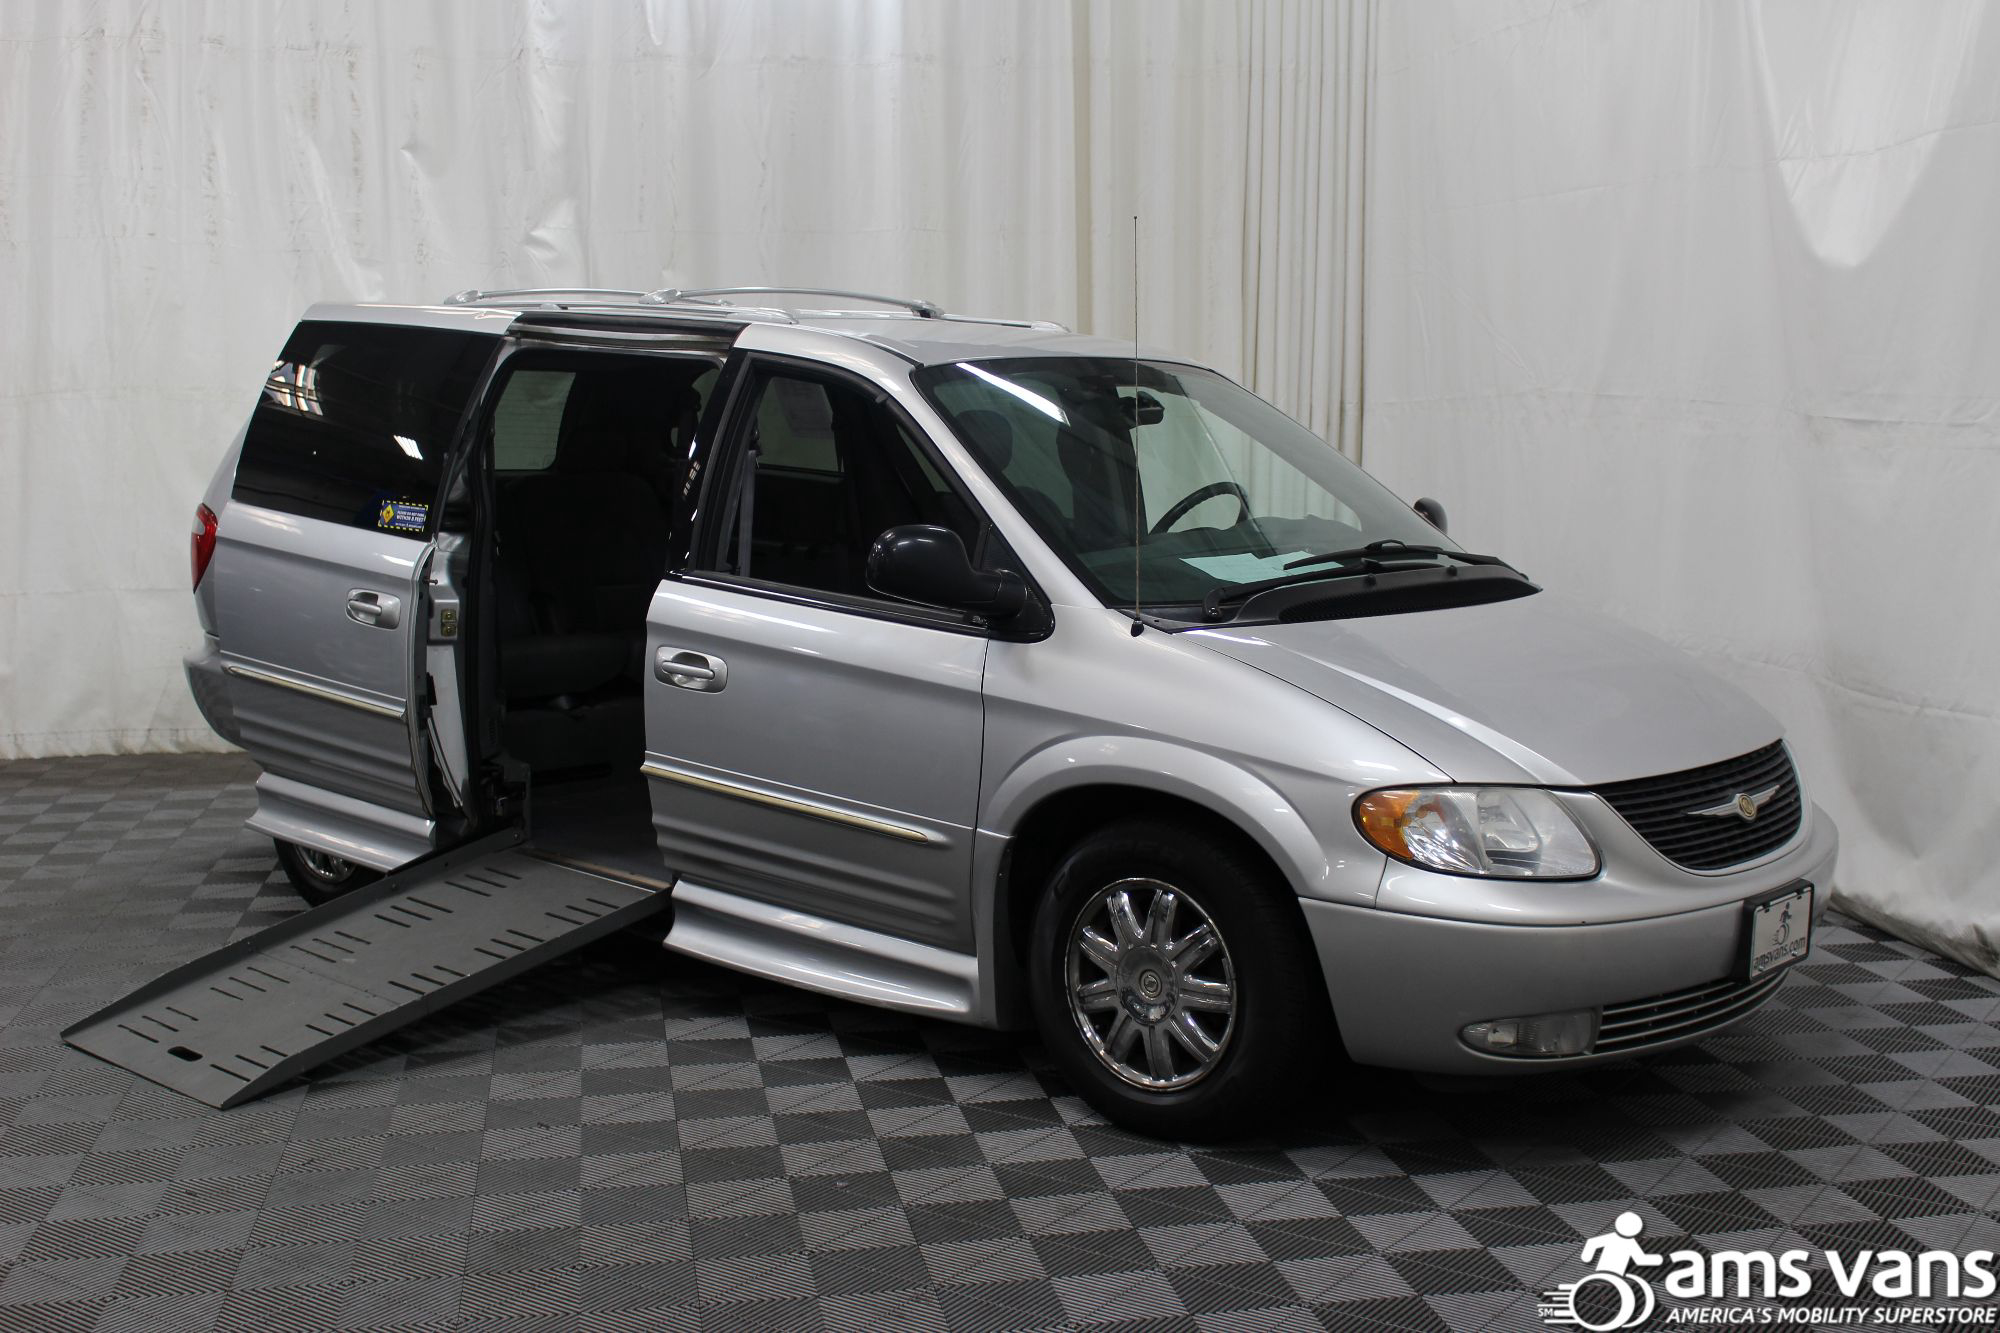 2004 chrysler town and country limited